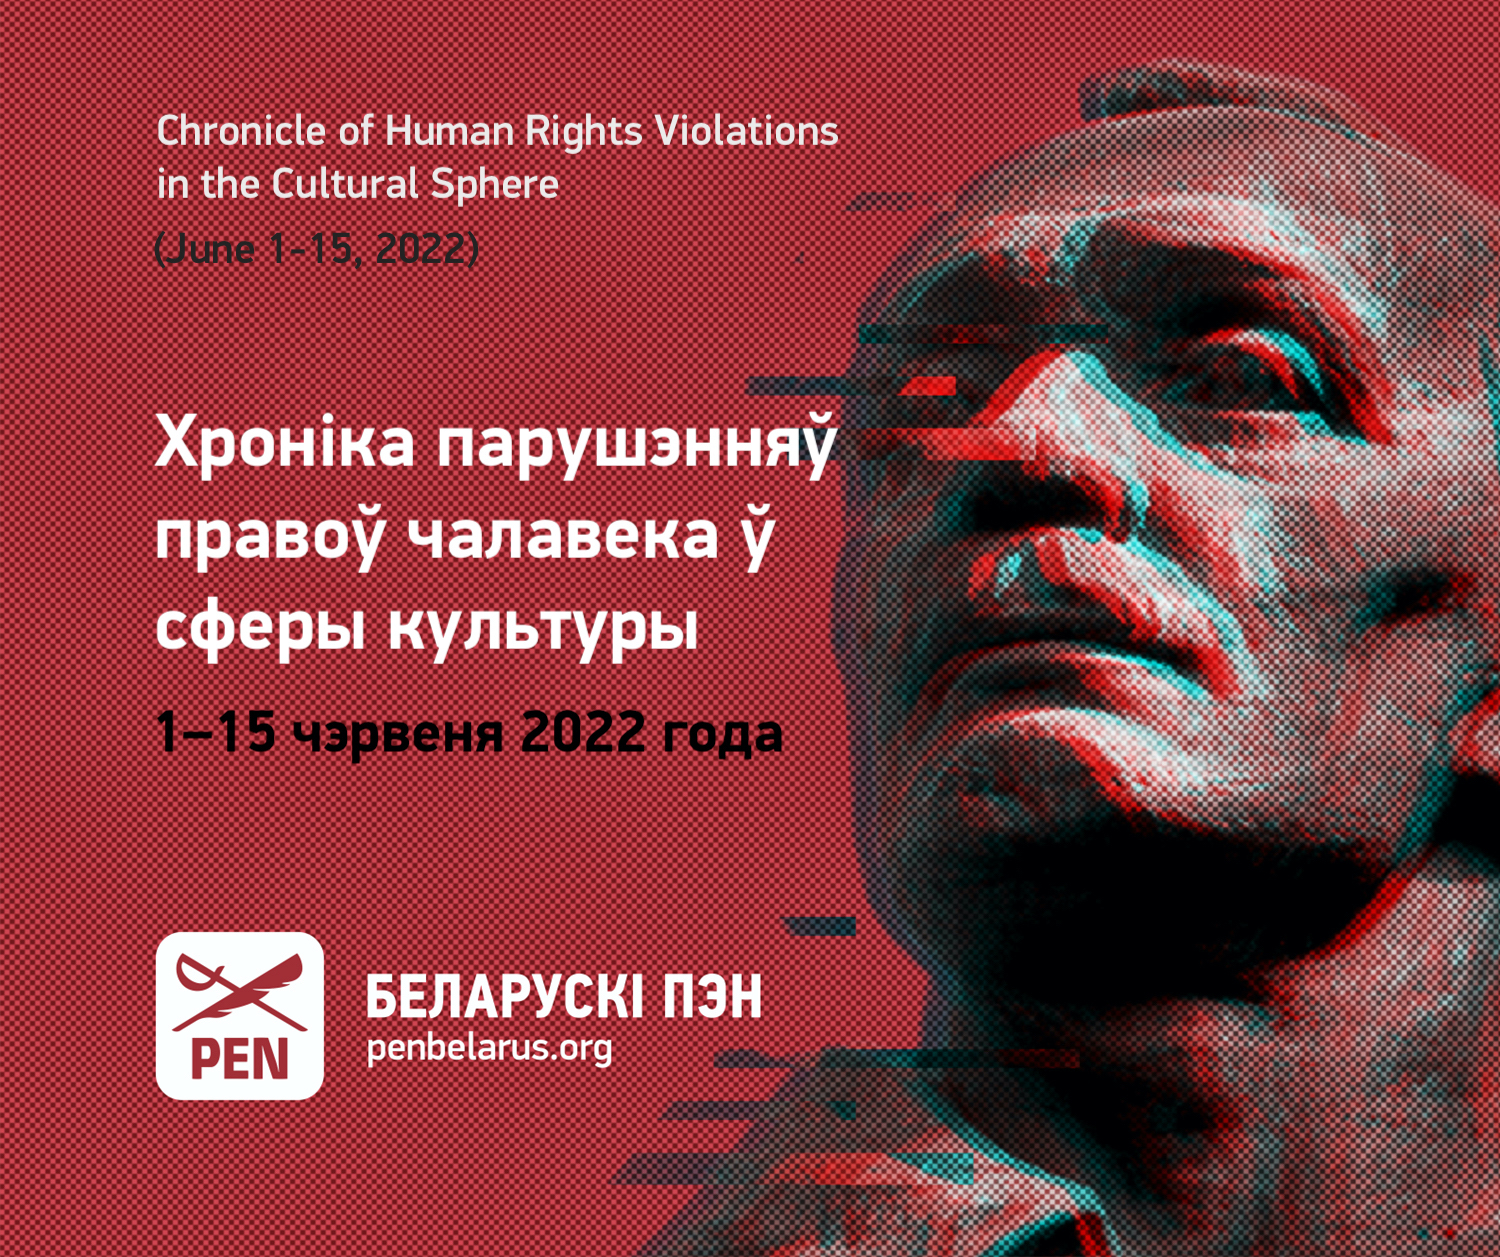 Chronicle of Human Rights Violations in the Cultural Sphere (June 1-15, 2022)